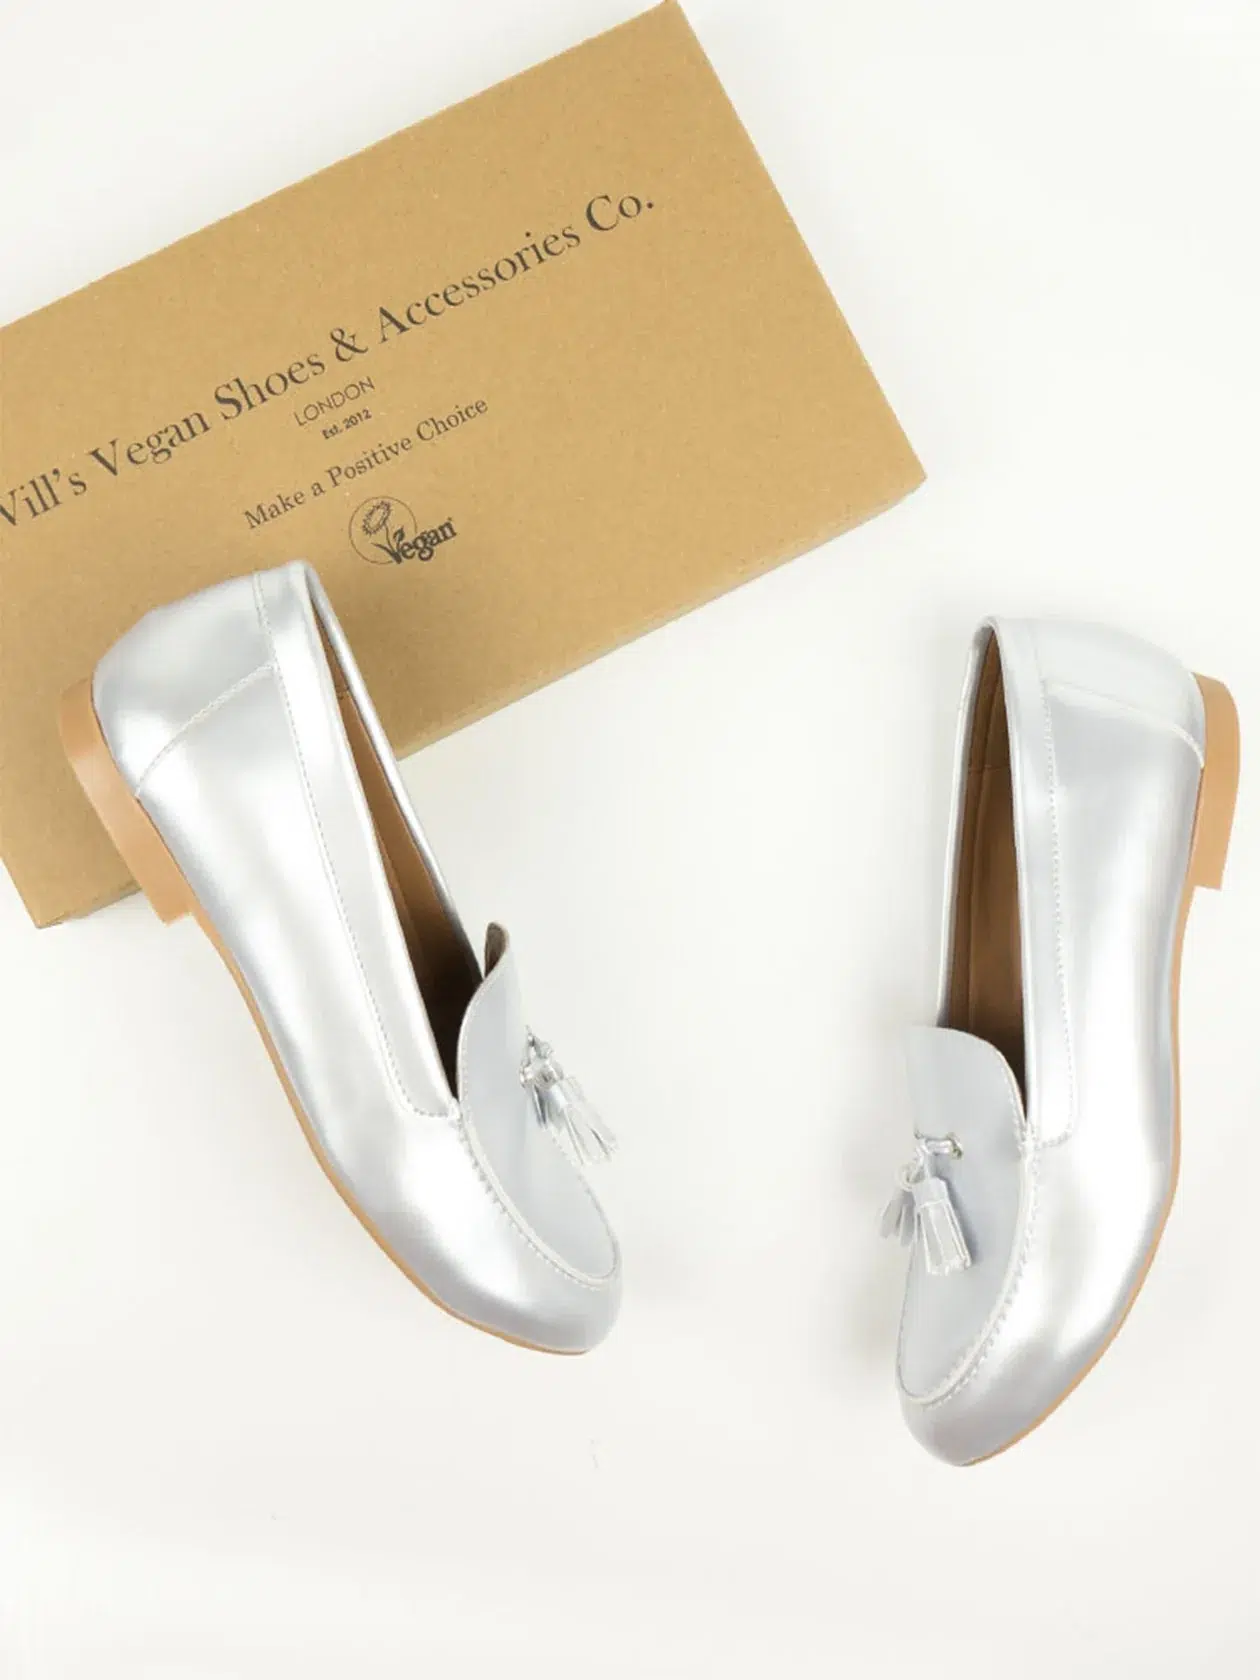 Will's Vegan Store sustainable silver loafers and their box.